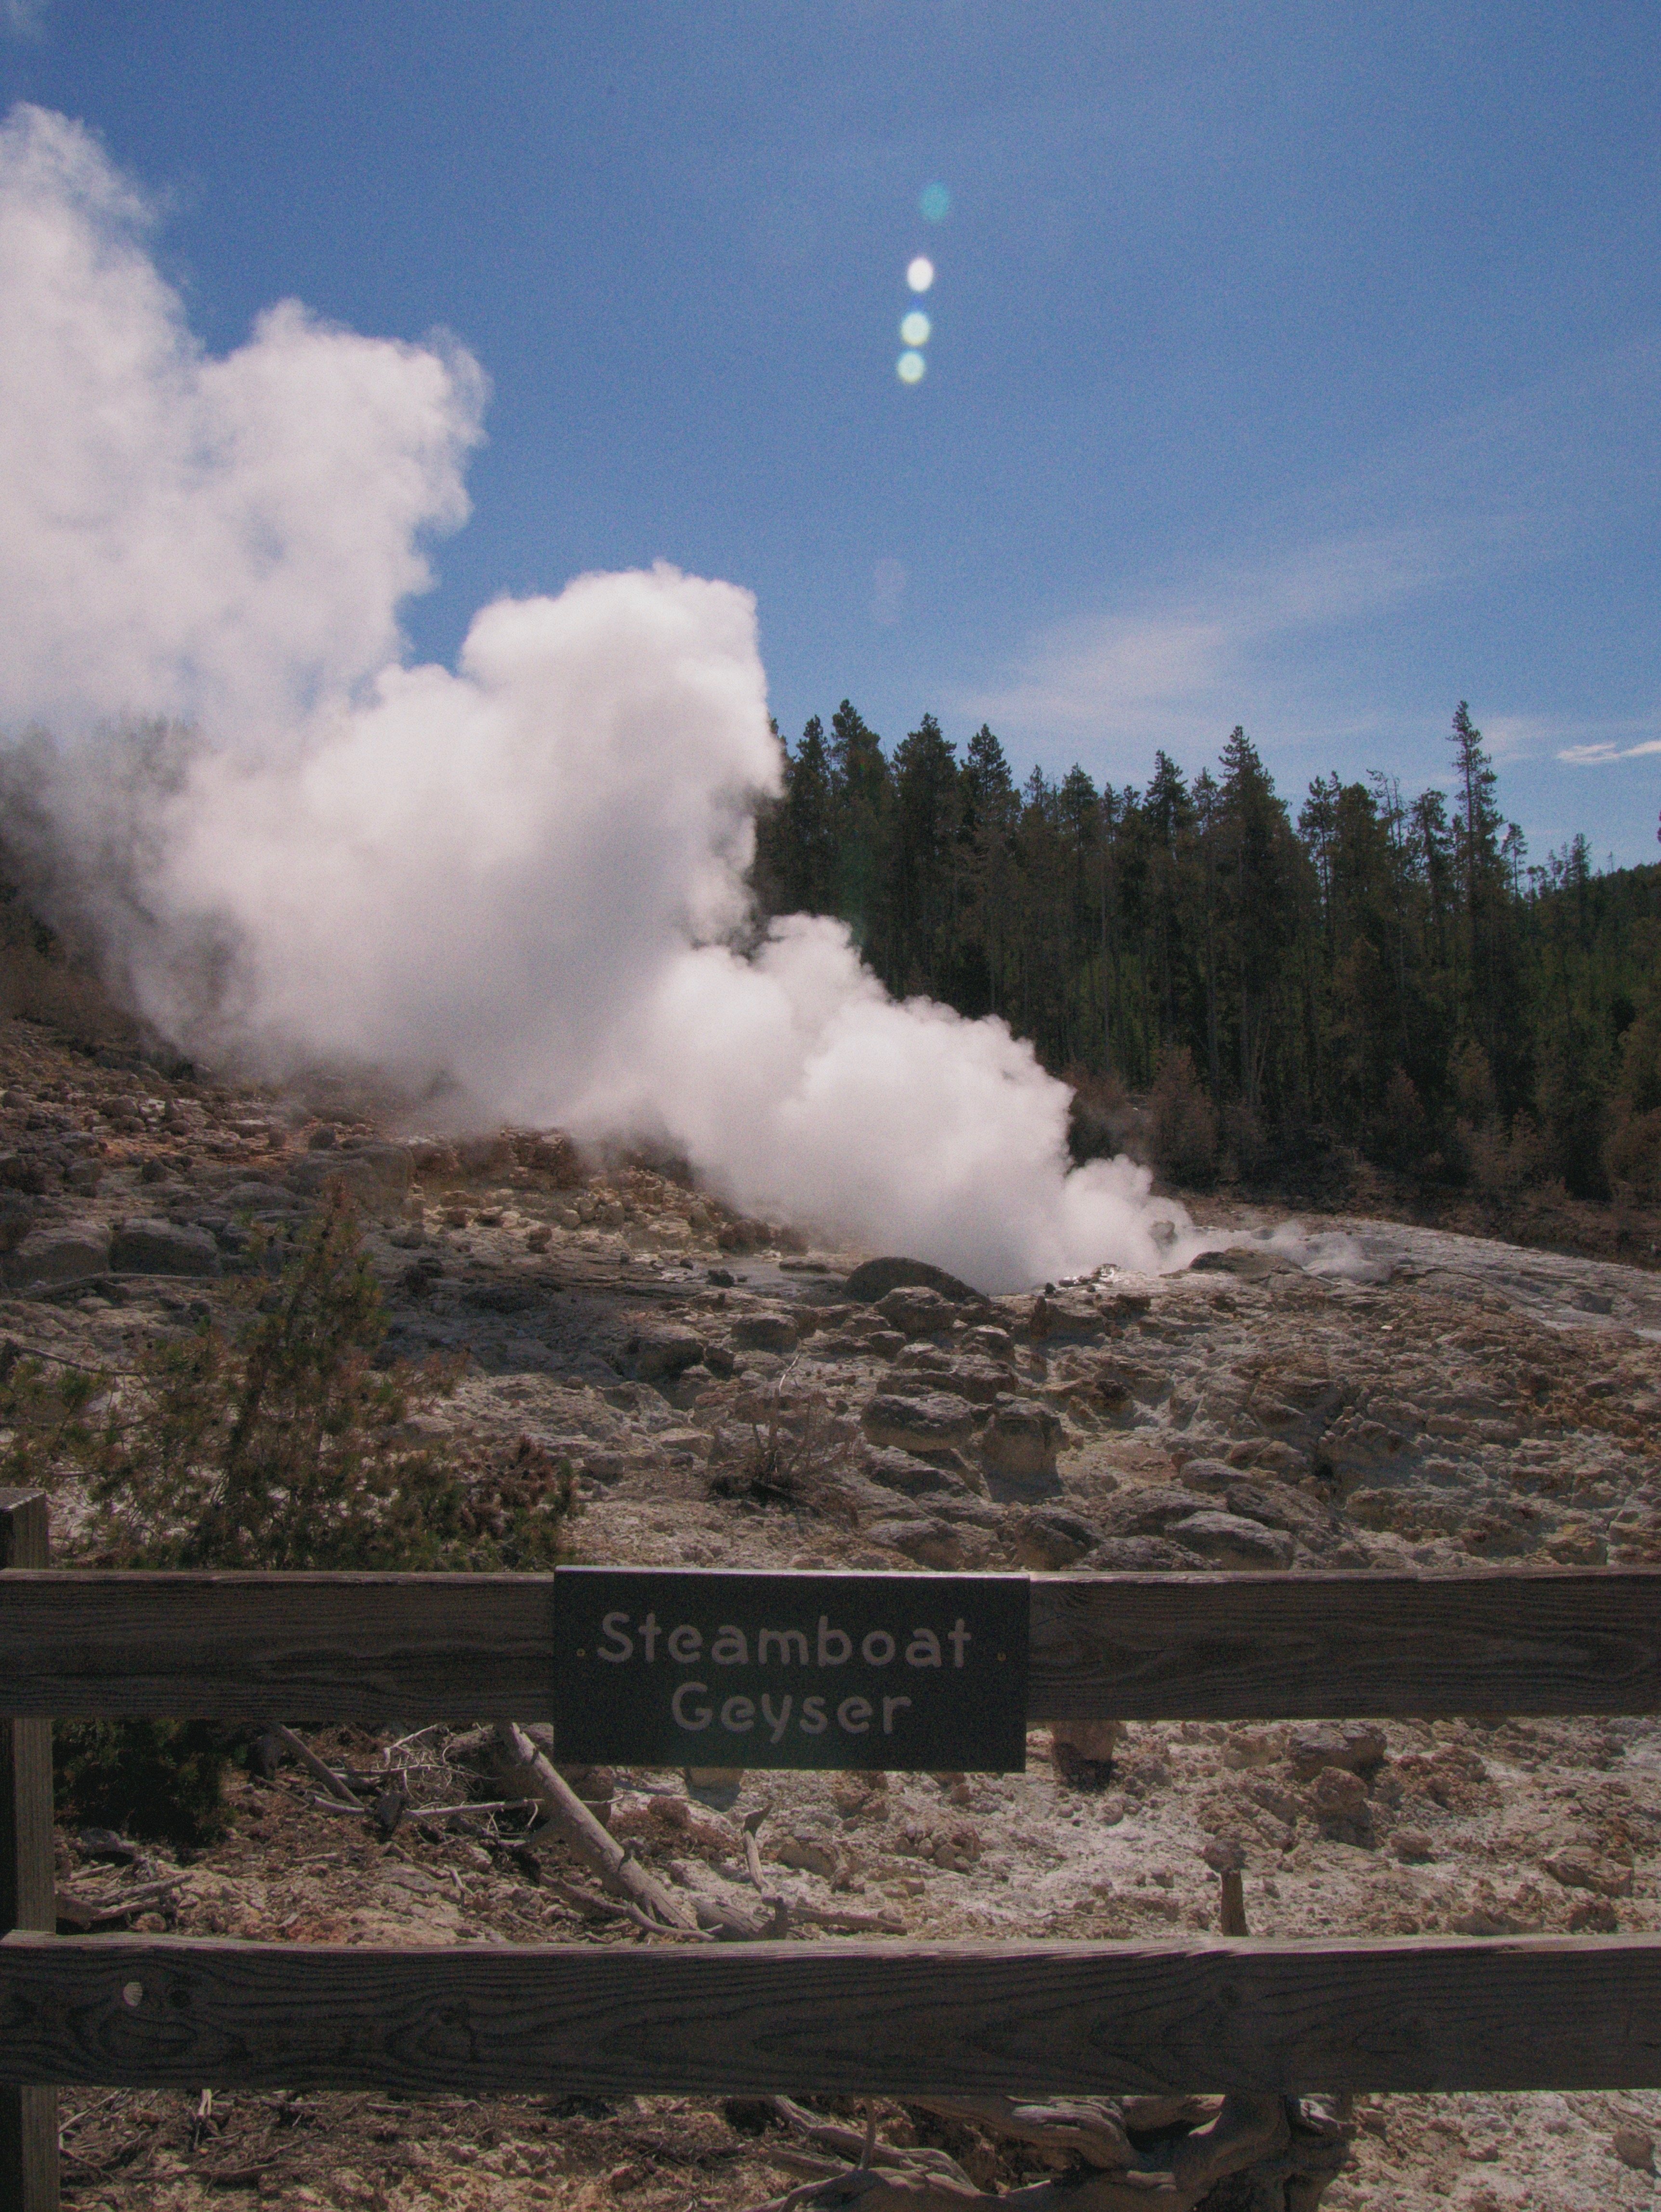 Steamboat geyser with a lot of steam from the upper point